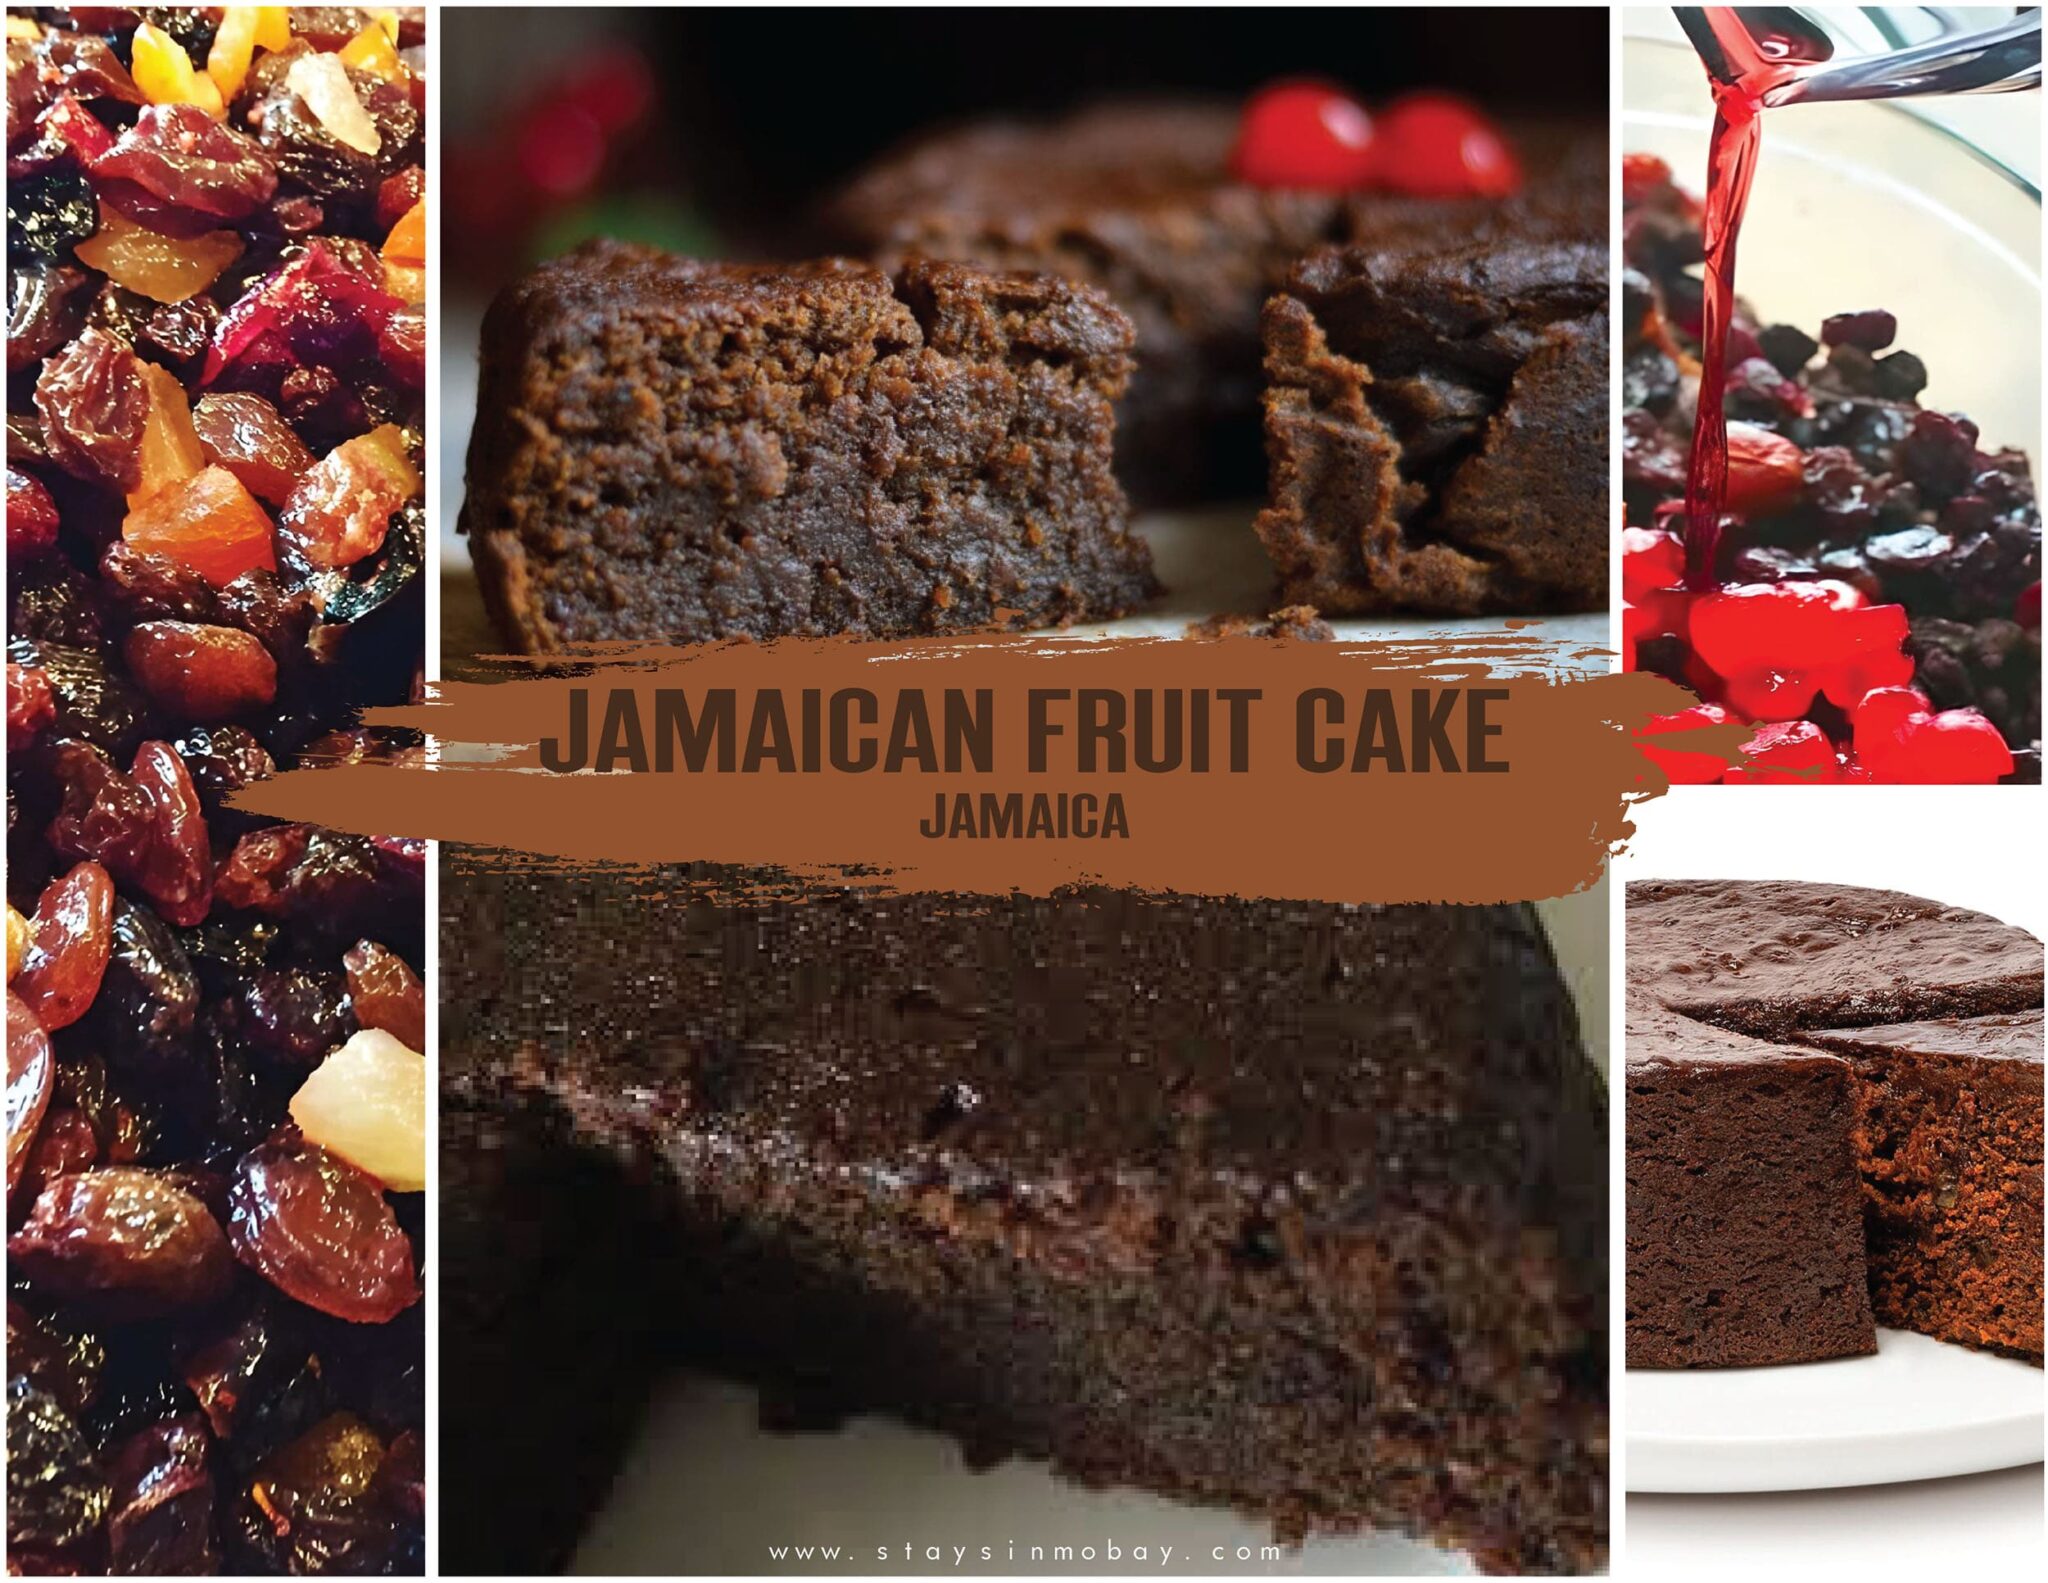 Jamaican Fruit Cake - Blog For All Things Jamaica